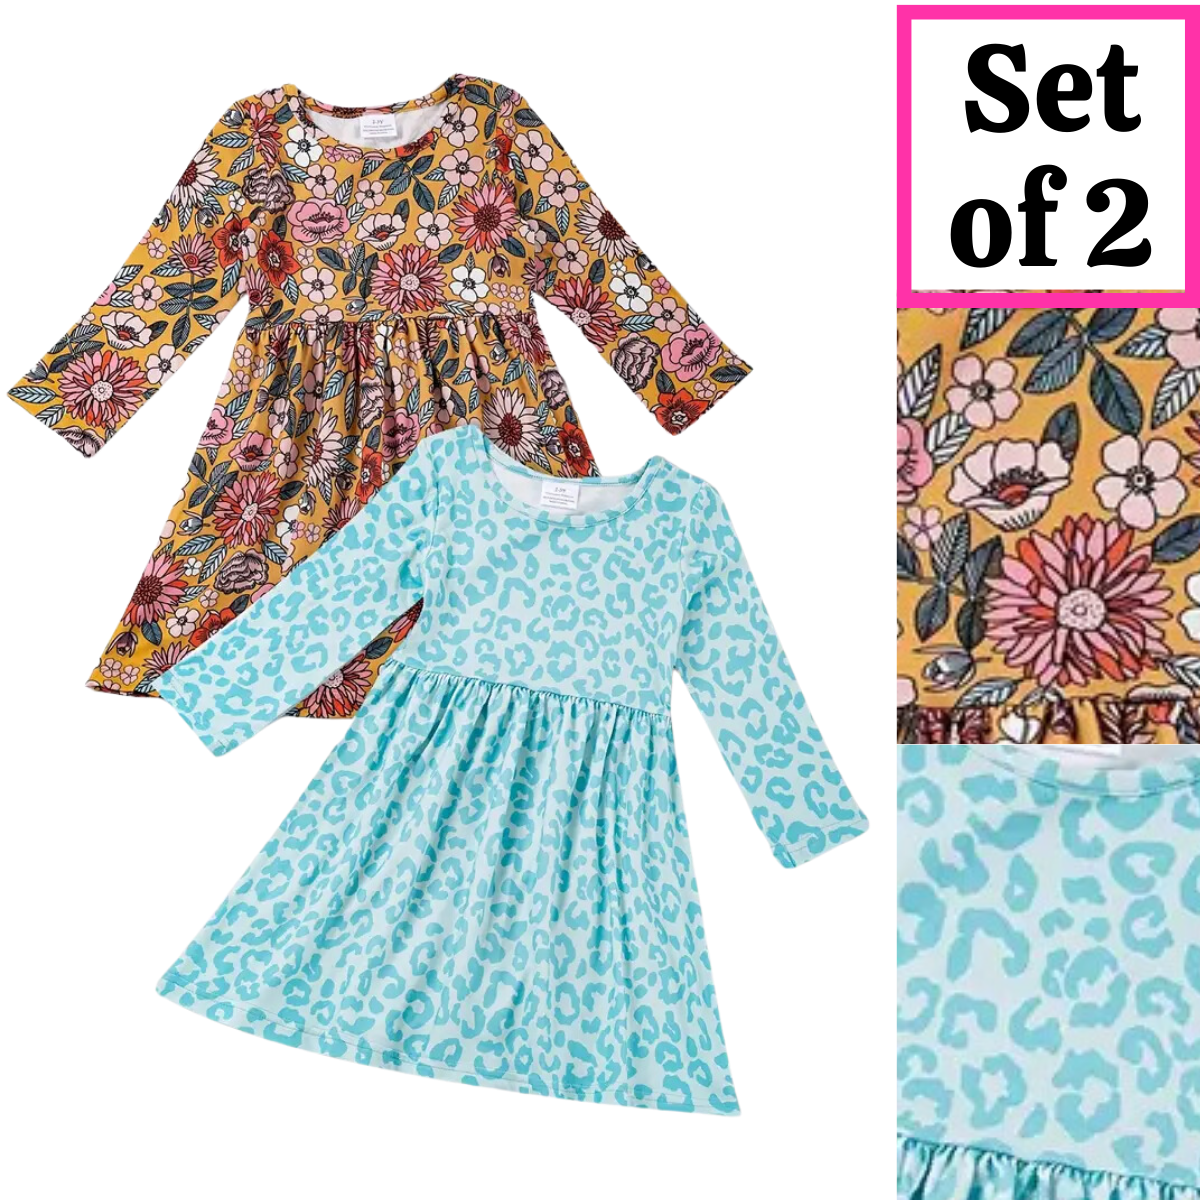 Kids Clothing -  Easter - 2 Pack of Girls Long Sleeve Twirly Dresses - Teal Leopard Print / Golden Floral